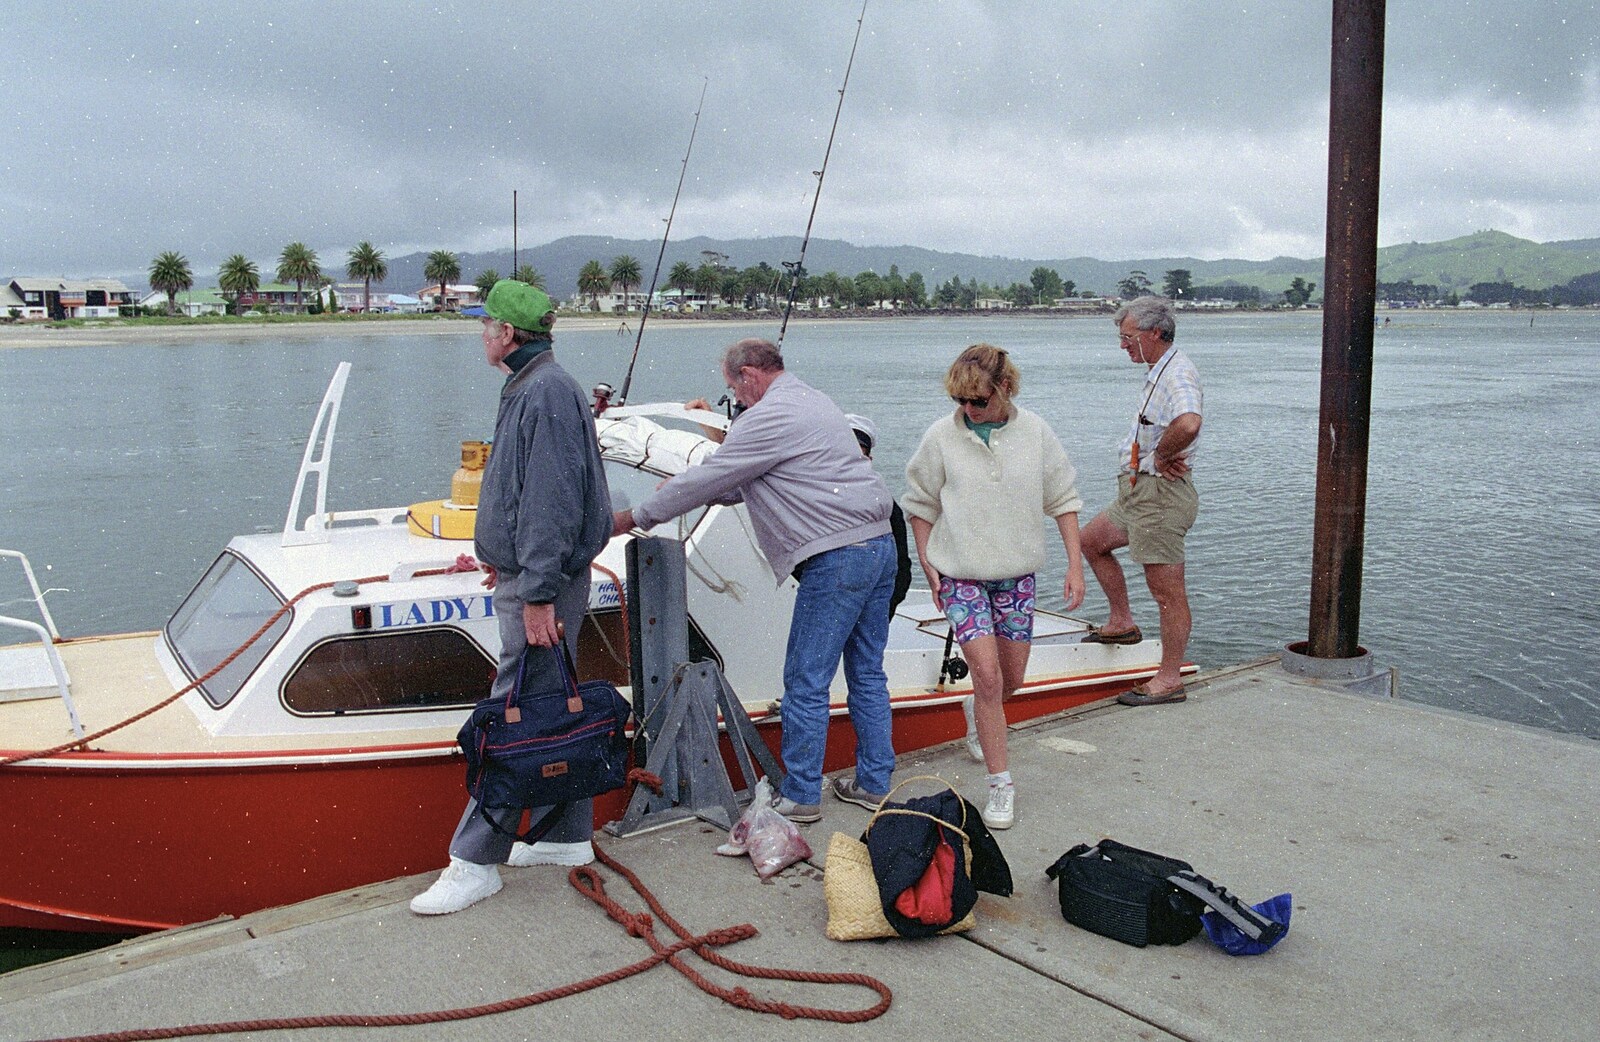 Disembarking the boat from Ferry Landing, Whitianga, New Zealand - 23rd November 1992